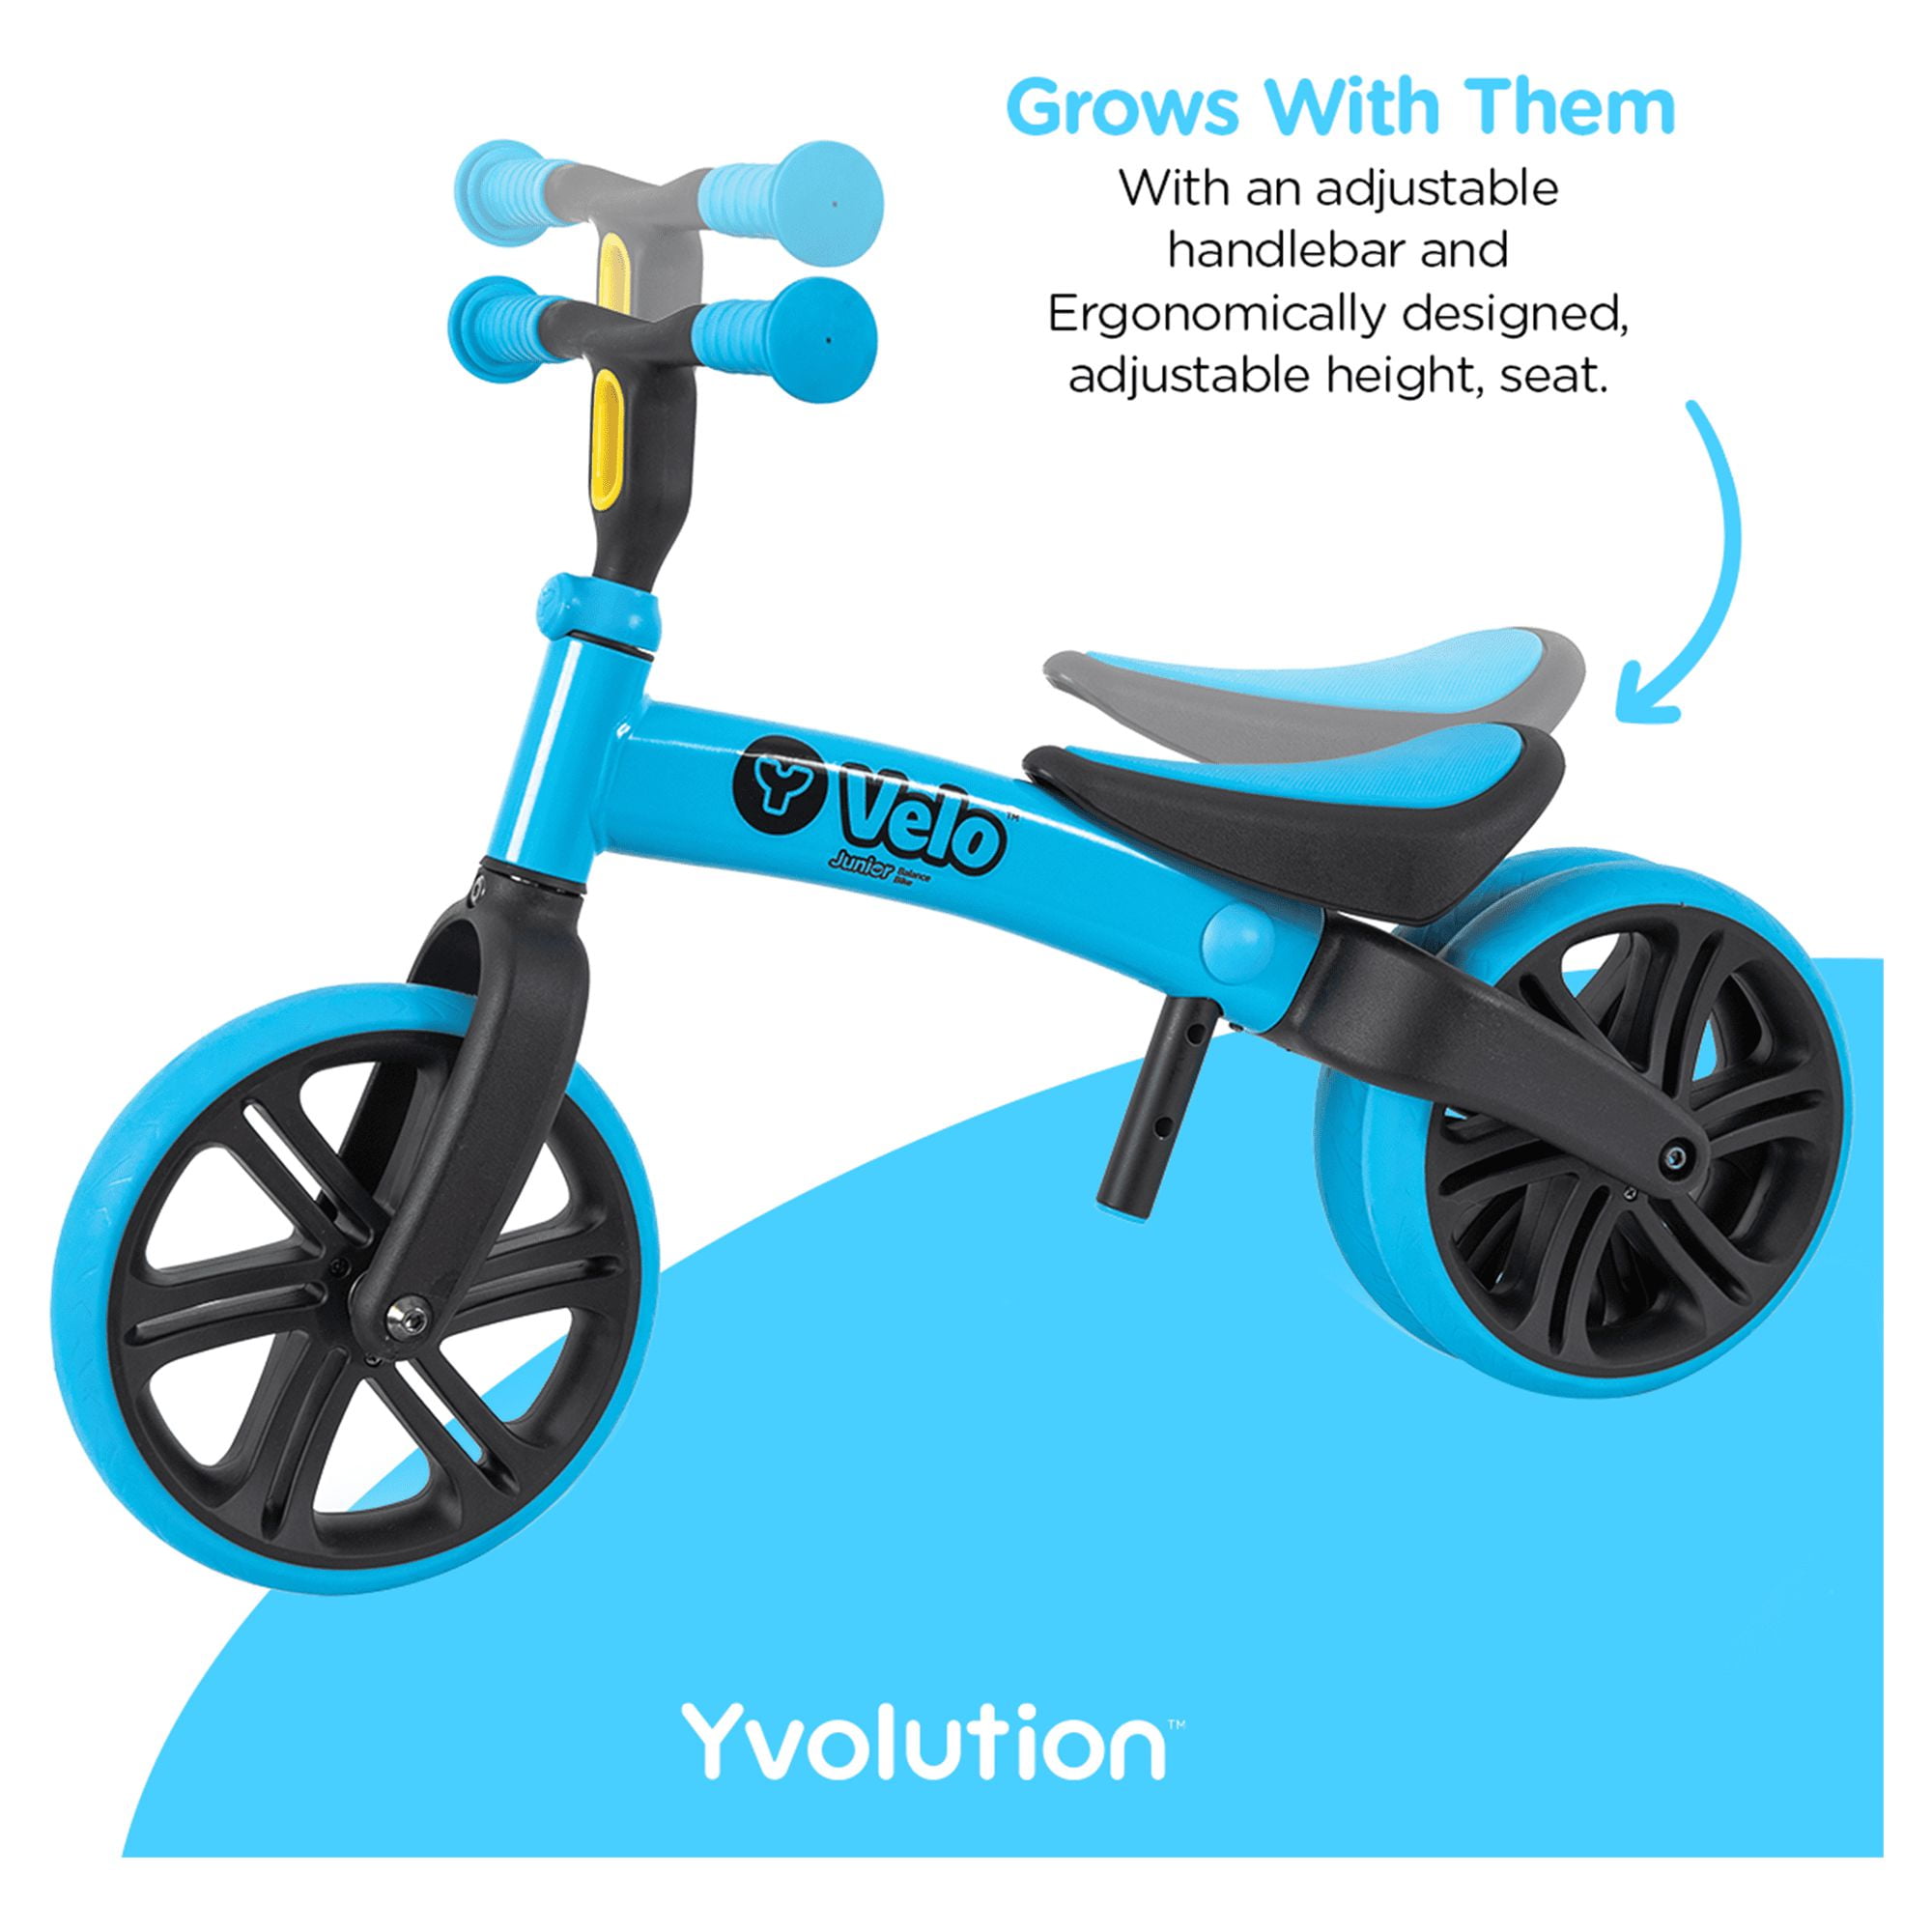 Yvolution Velo Toddler Balance Bike 9\'\' Wheel (Blue) Boys and Girls, 18  Months to 3 Years Old | Laufräder